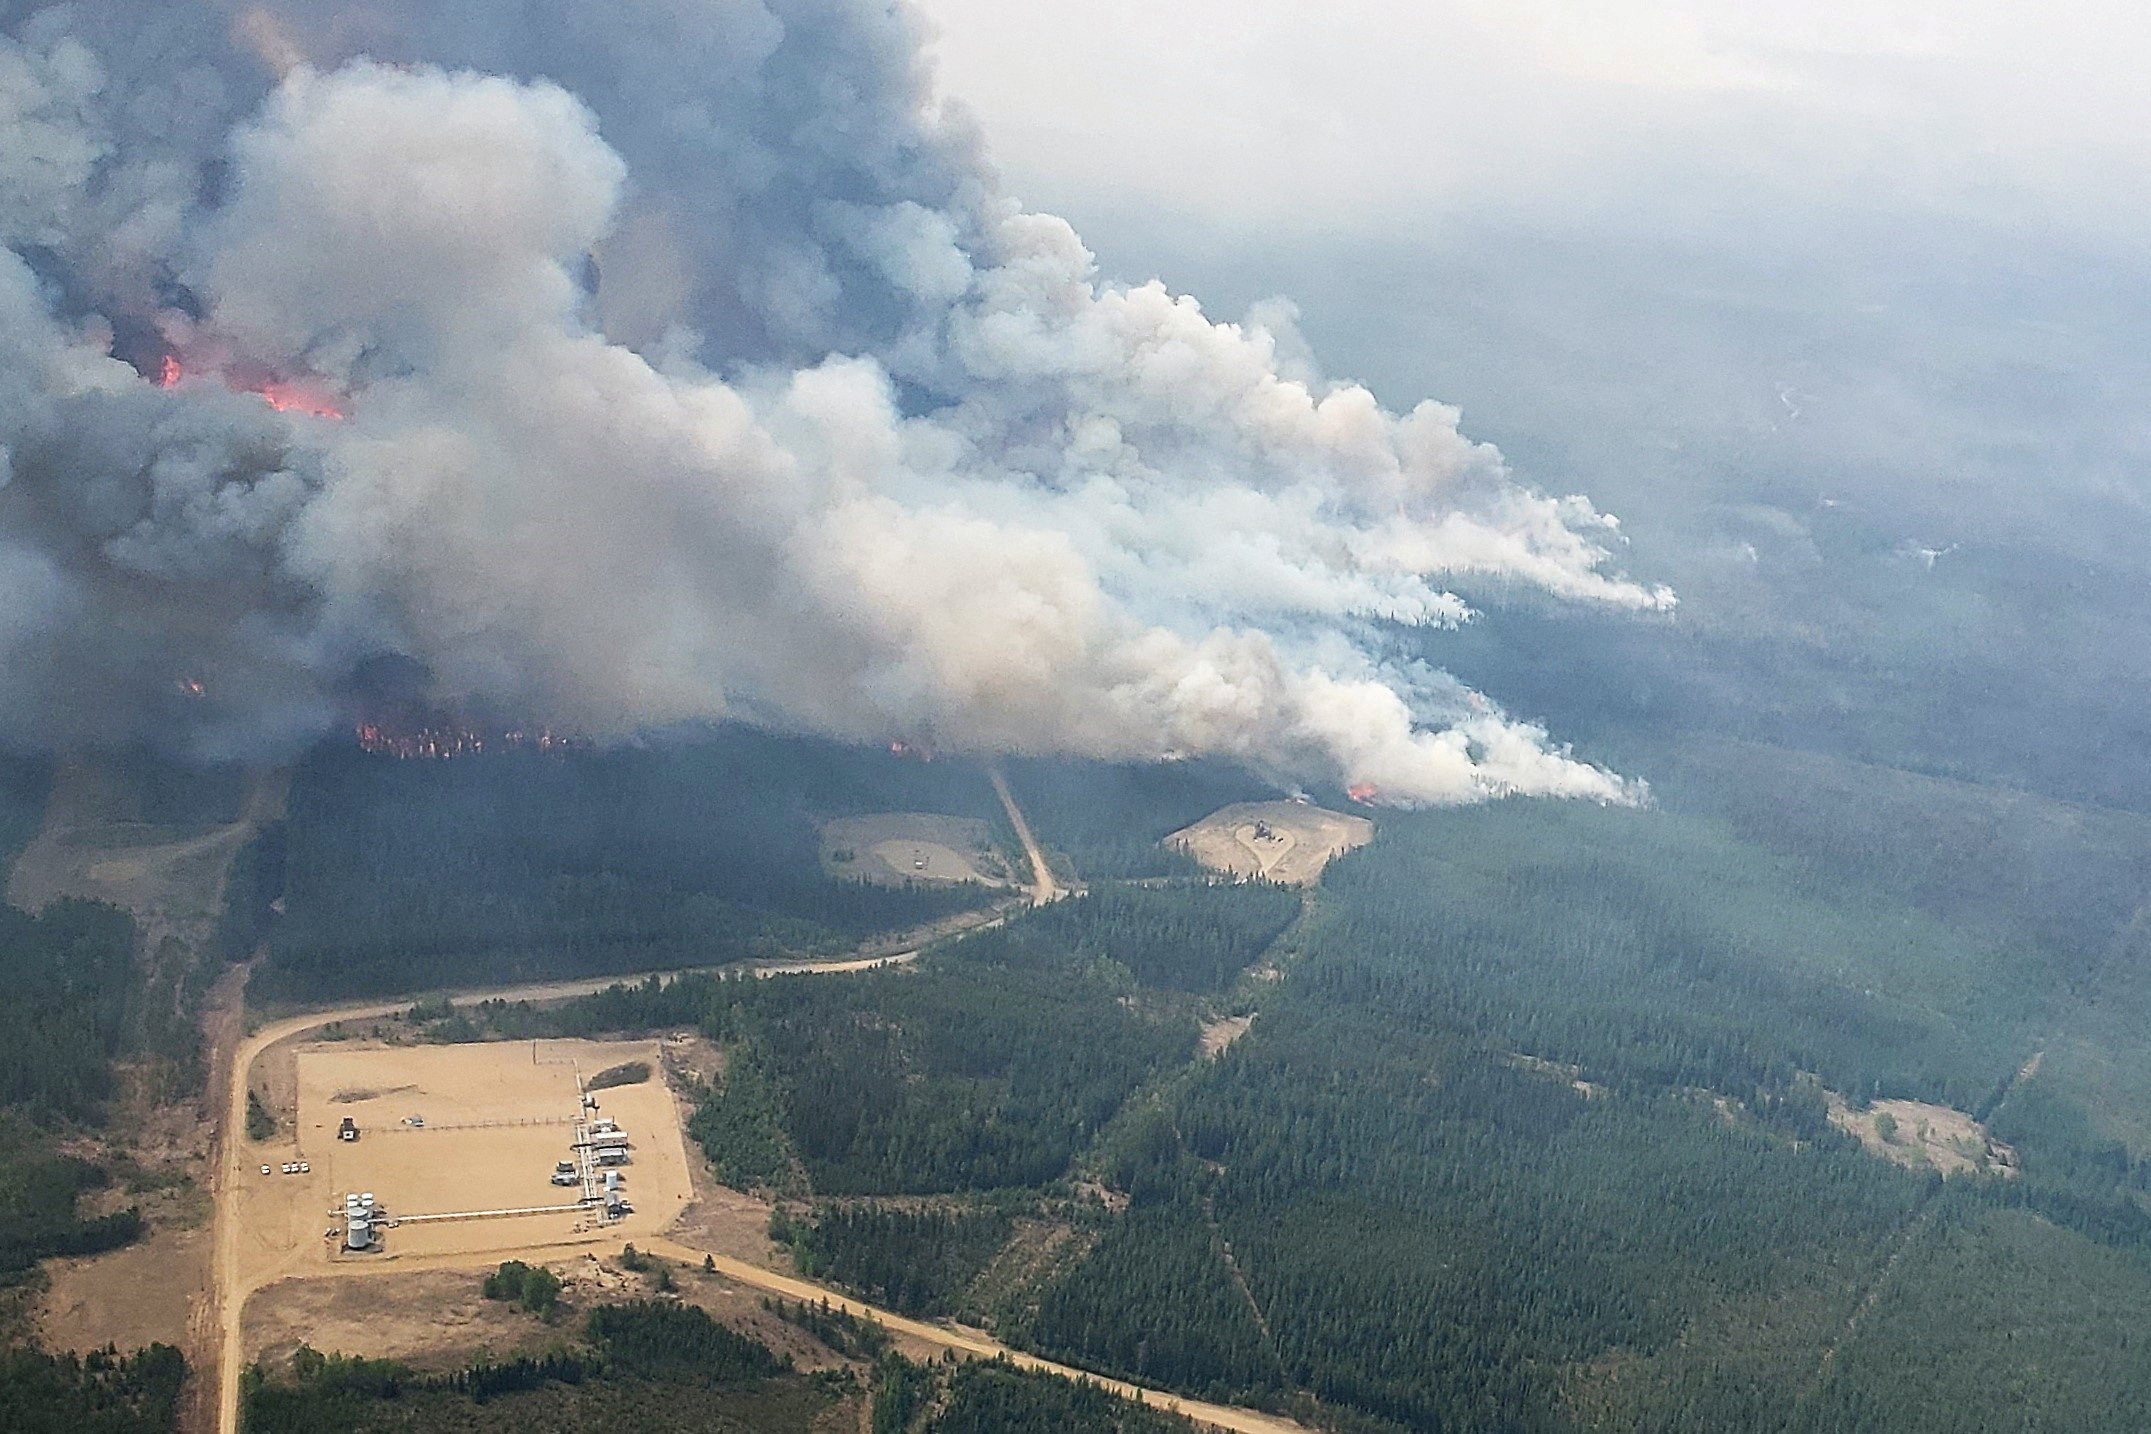 Smoke rises from areas of wildfire EWF-035 near Shining Bank